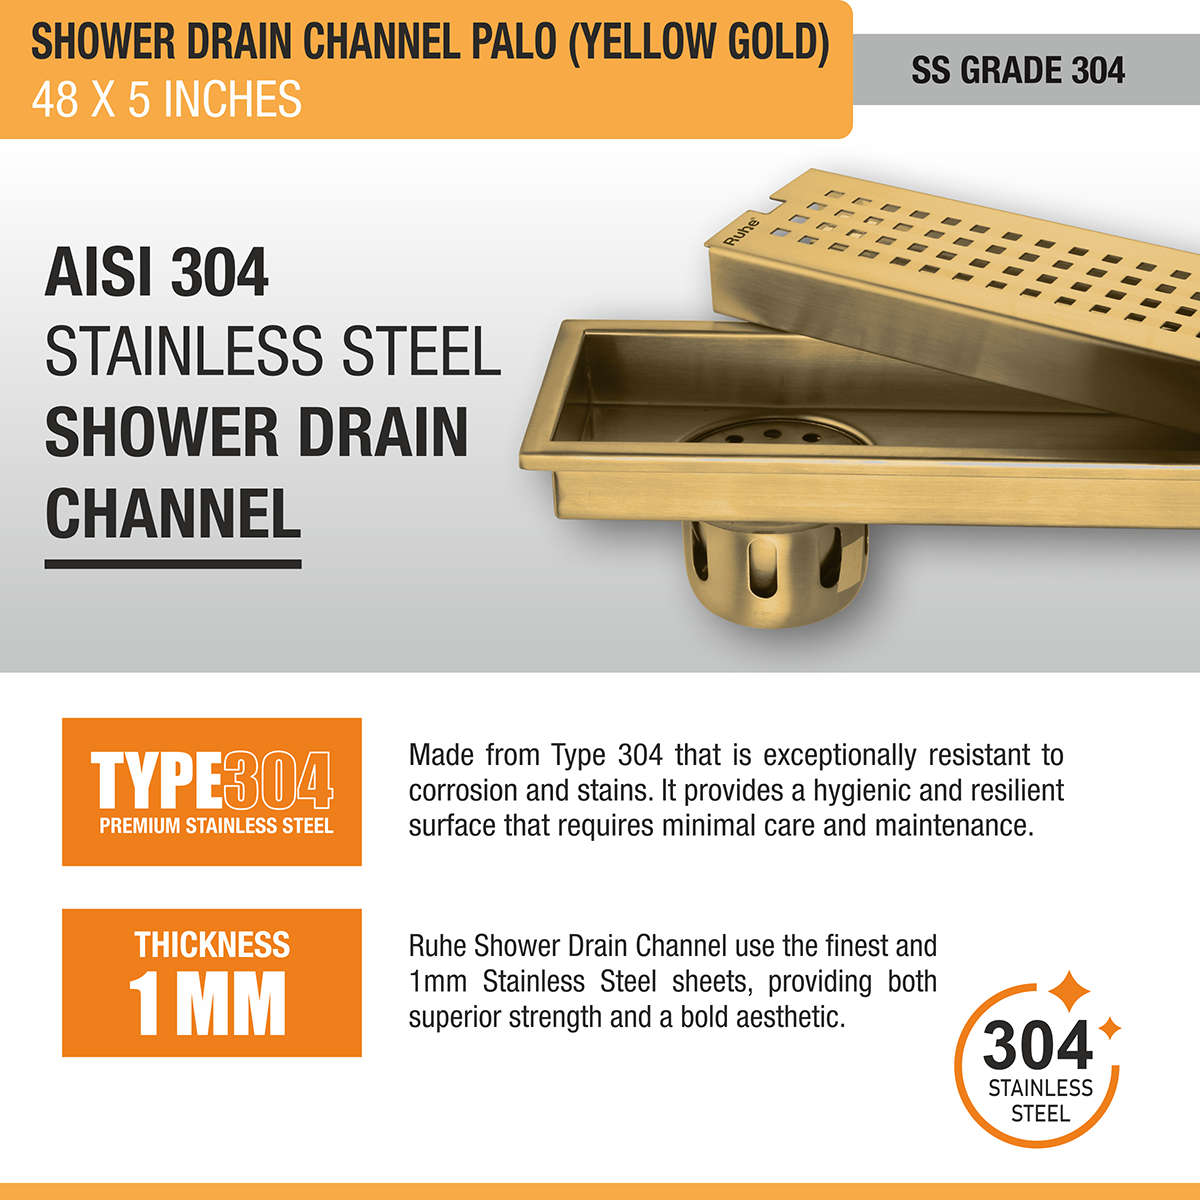 Palo Shower Drain Channel (48 x 5 Inches) YELLOW GOLD stainless steel